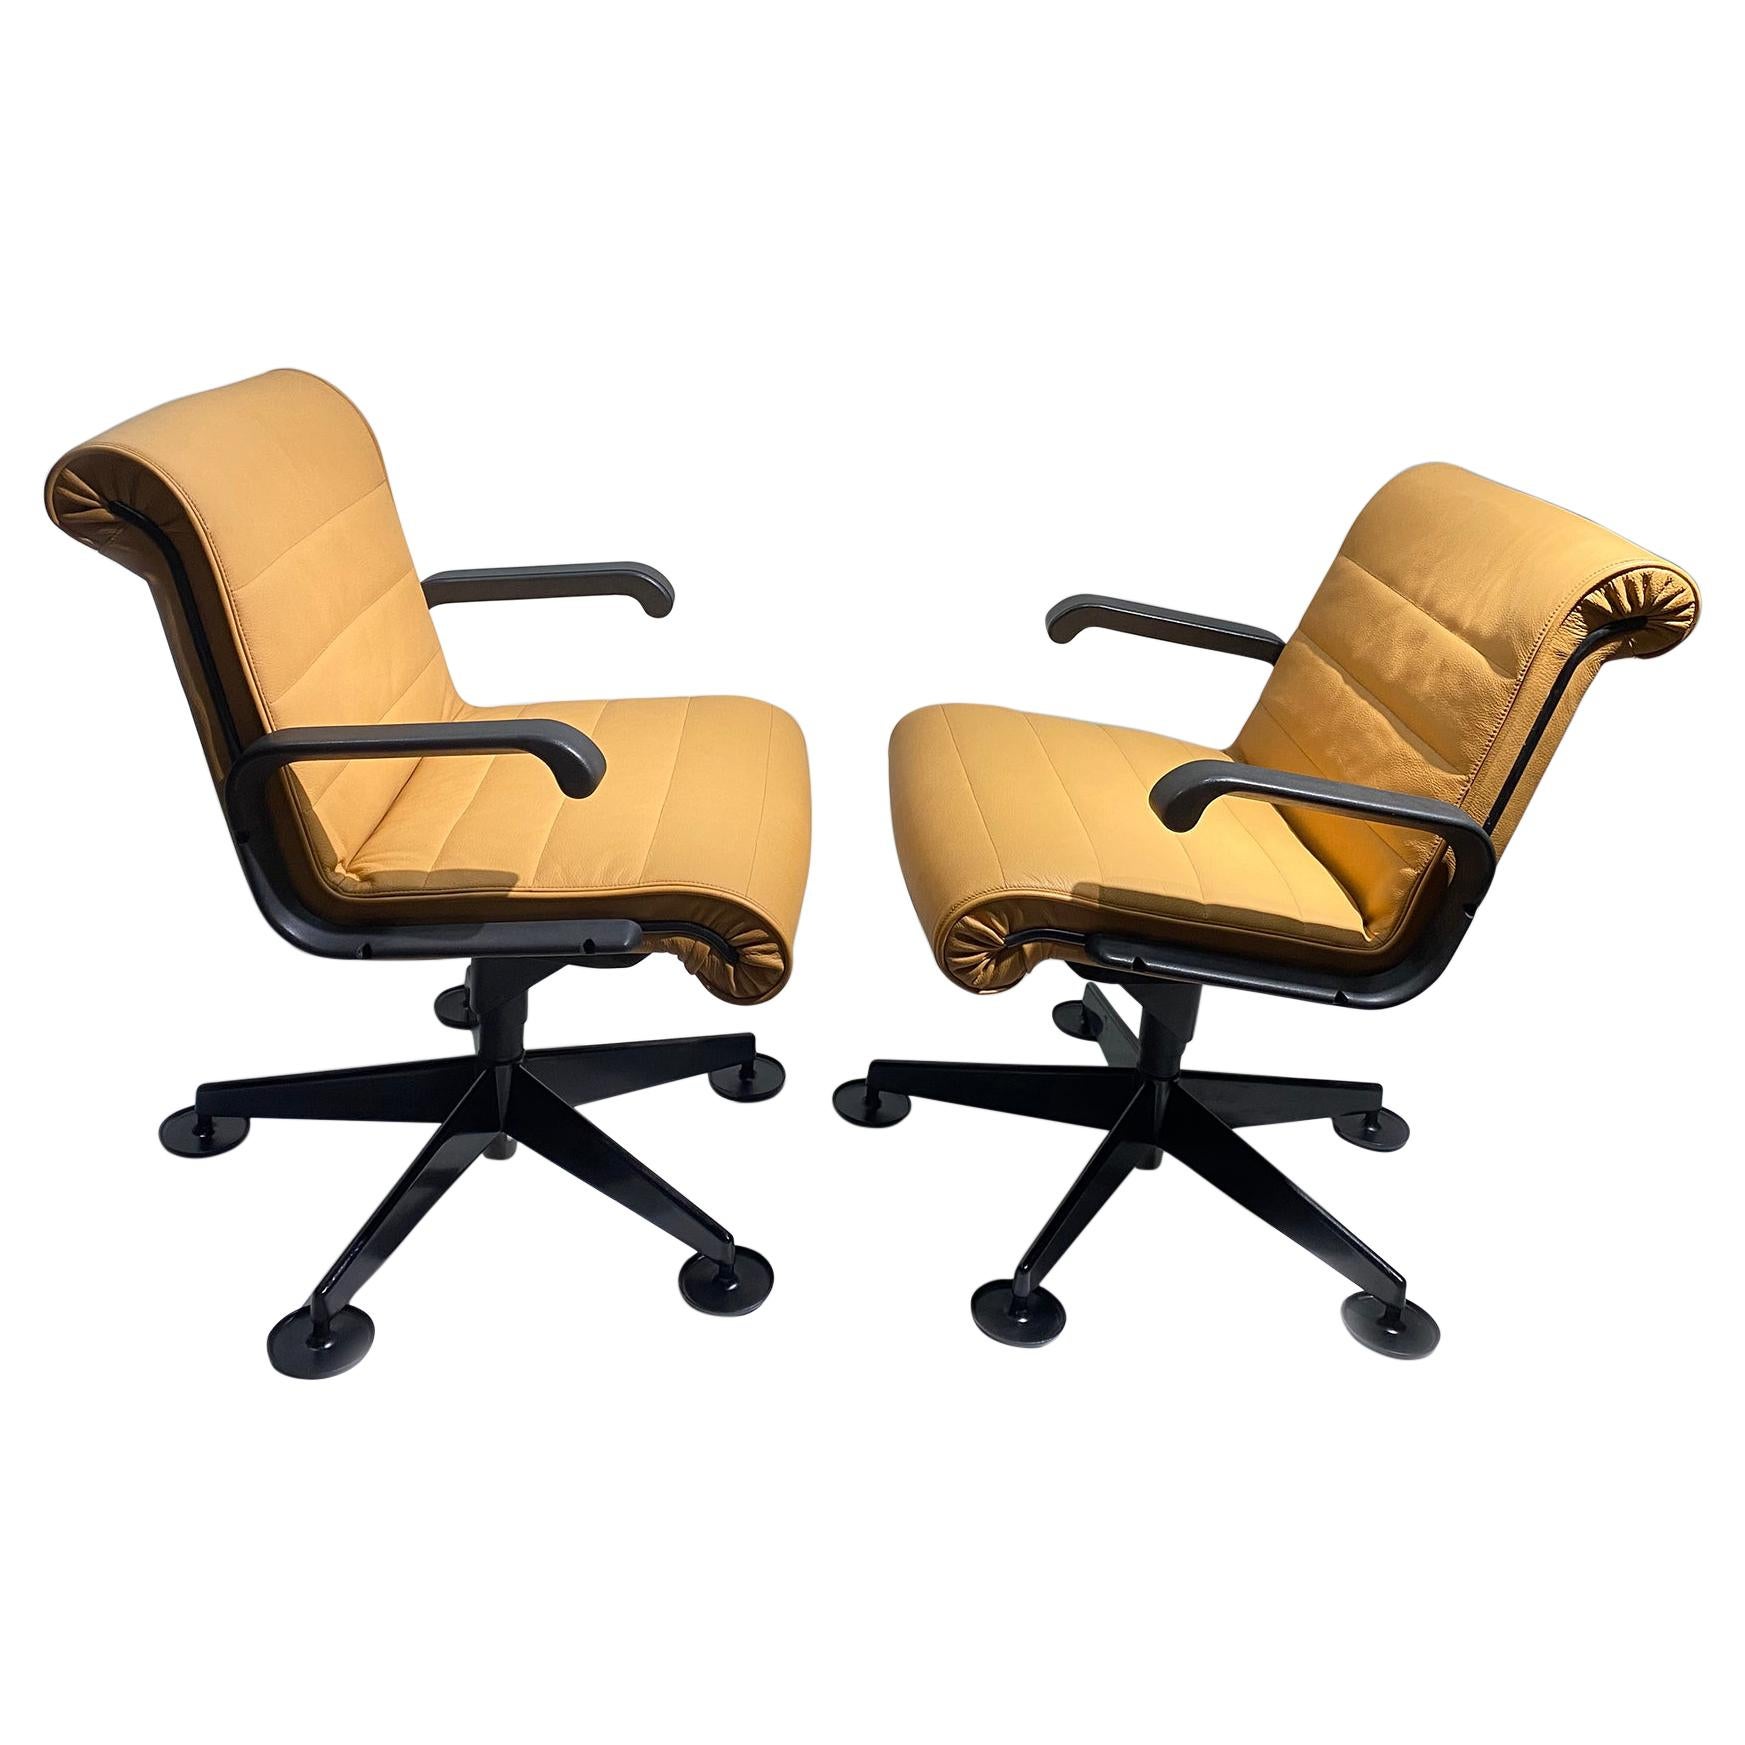 Pair of Richard Sapper for Knoll Executive Desk Chairs For Sale